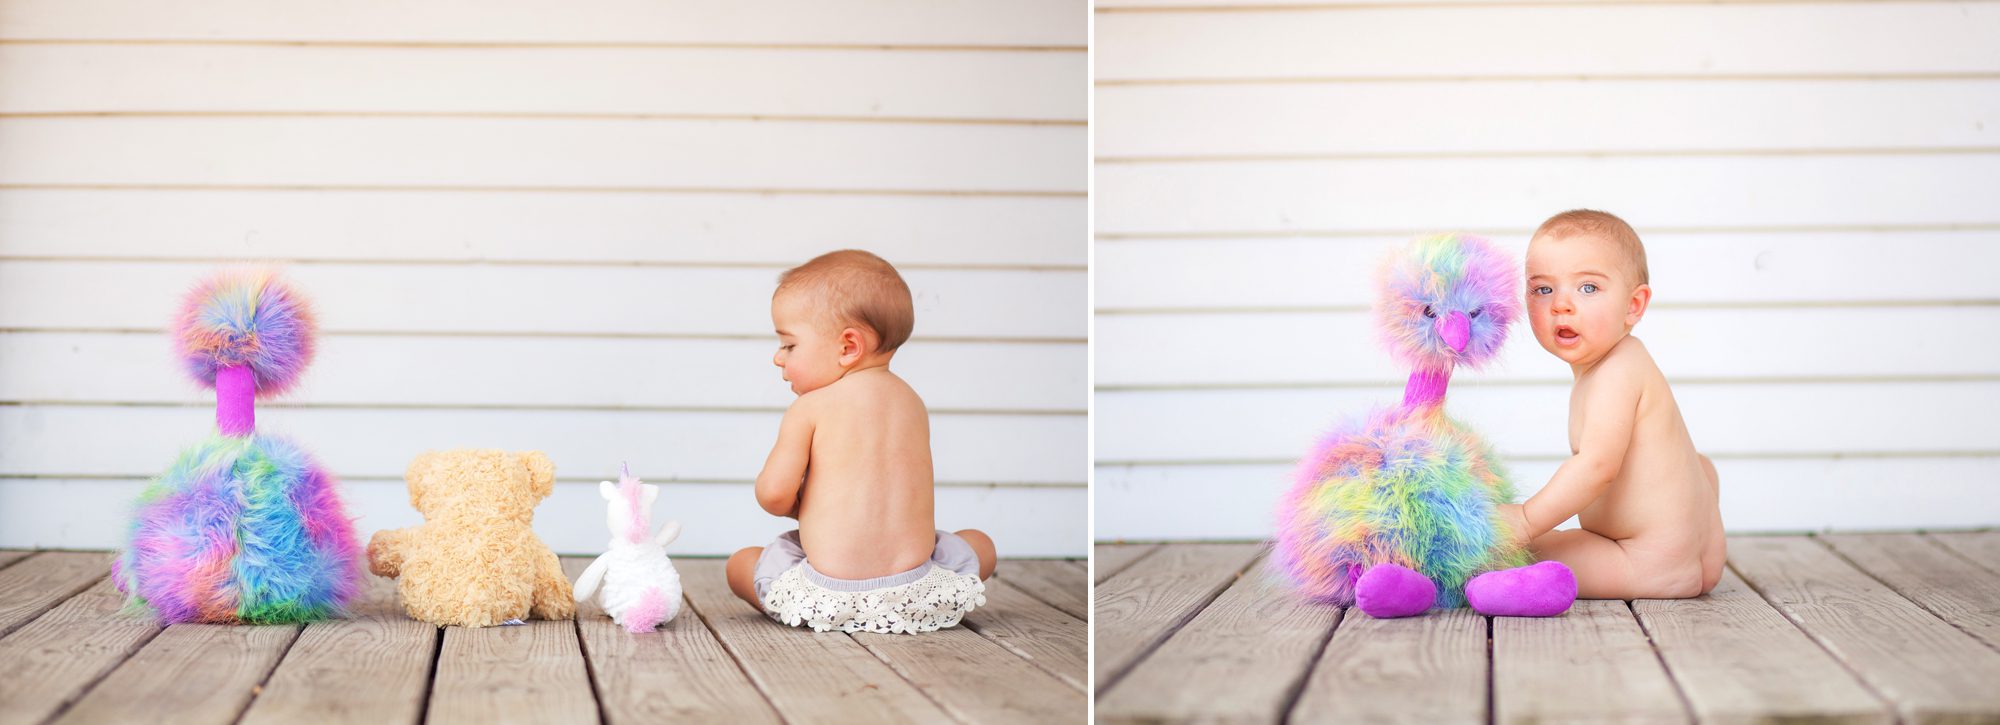 6 month old Collins at her photography shoot in Murfreesboro TN, photo by Krista Lee Photography